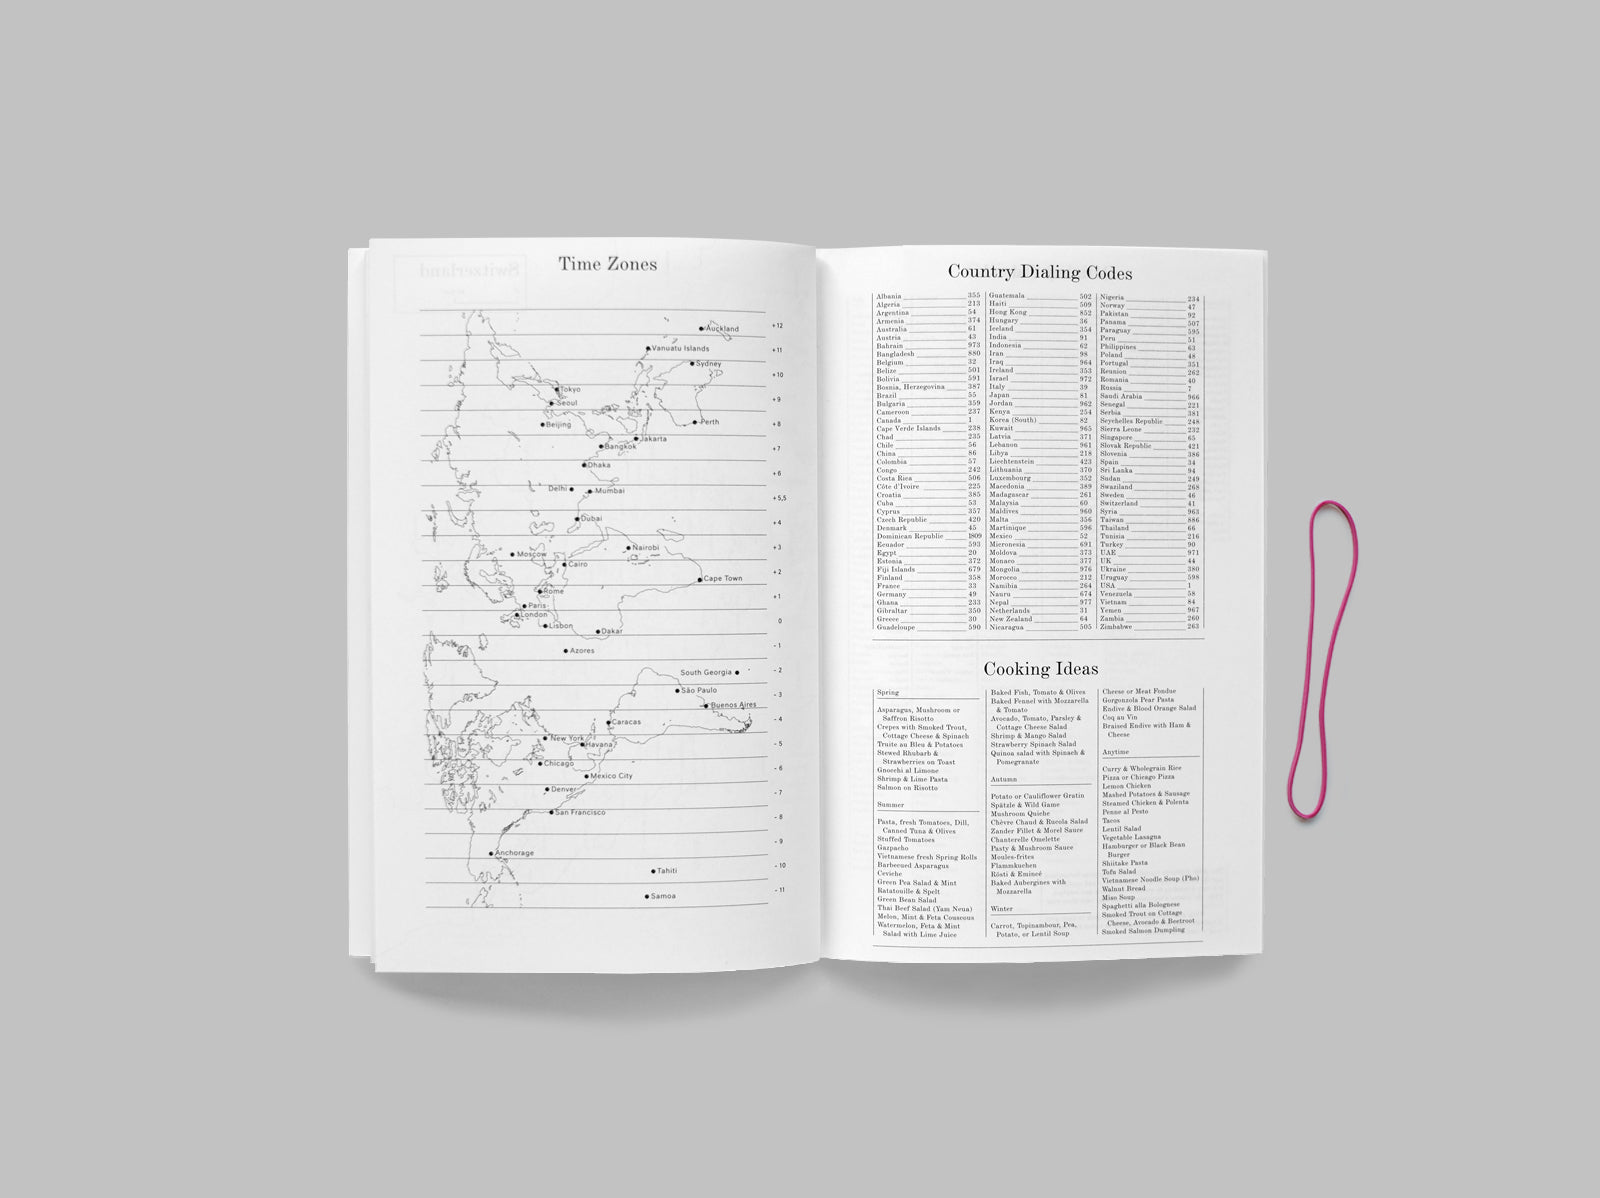 Spread from our 2018 planner showing the time zones, country dealing codes and cooking ideas.